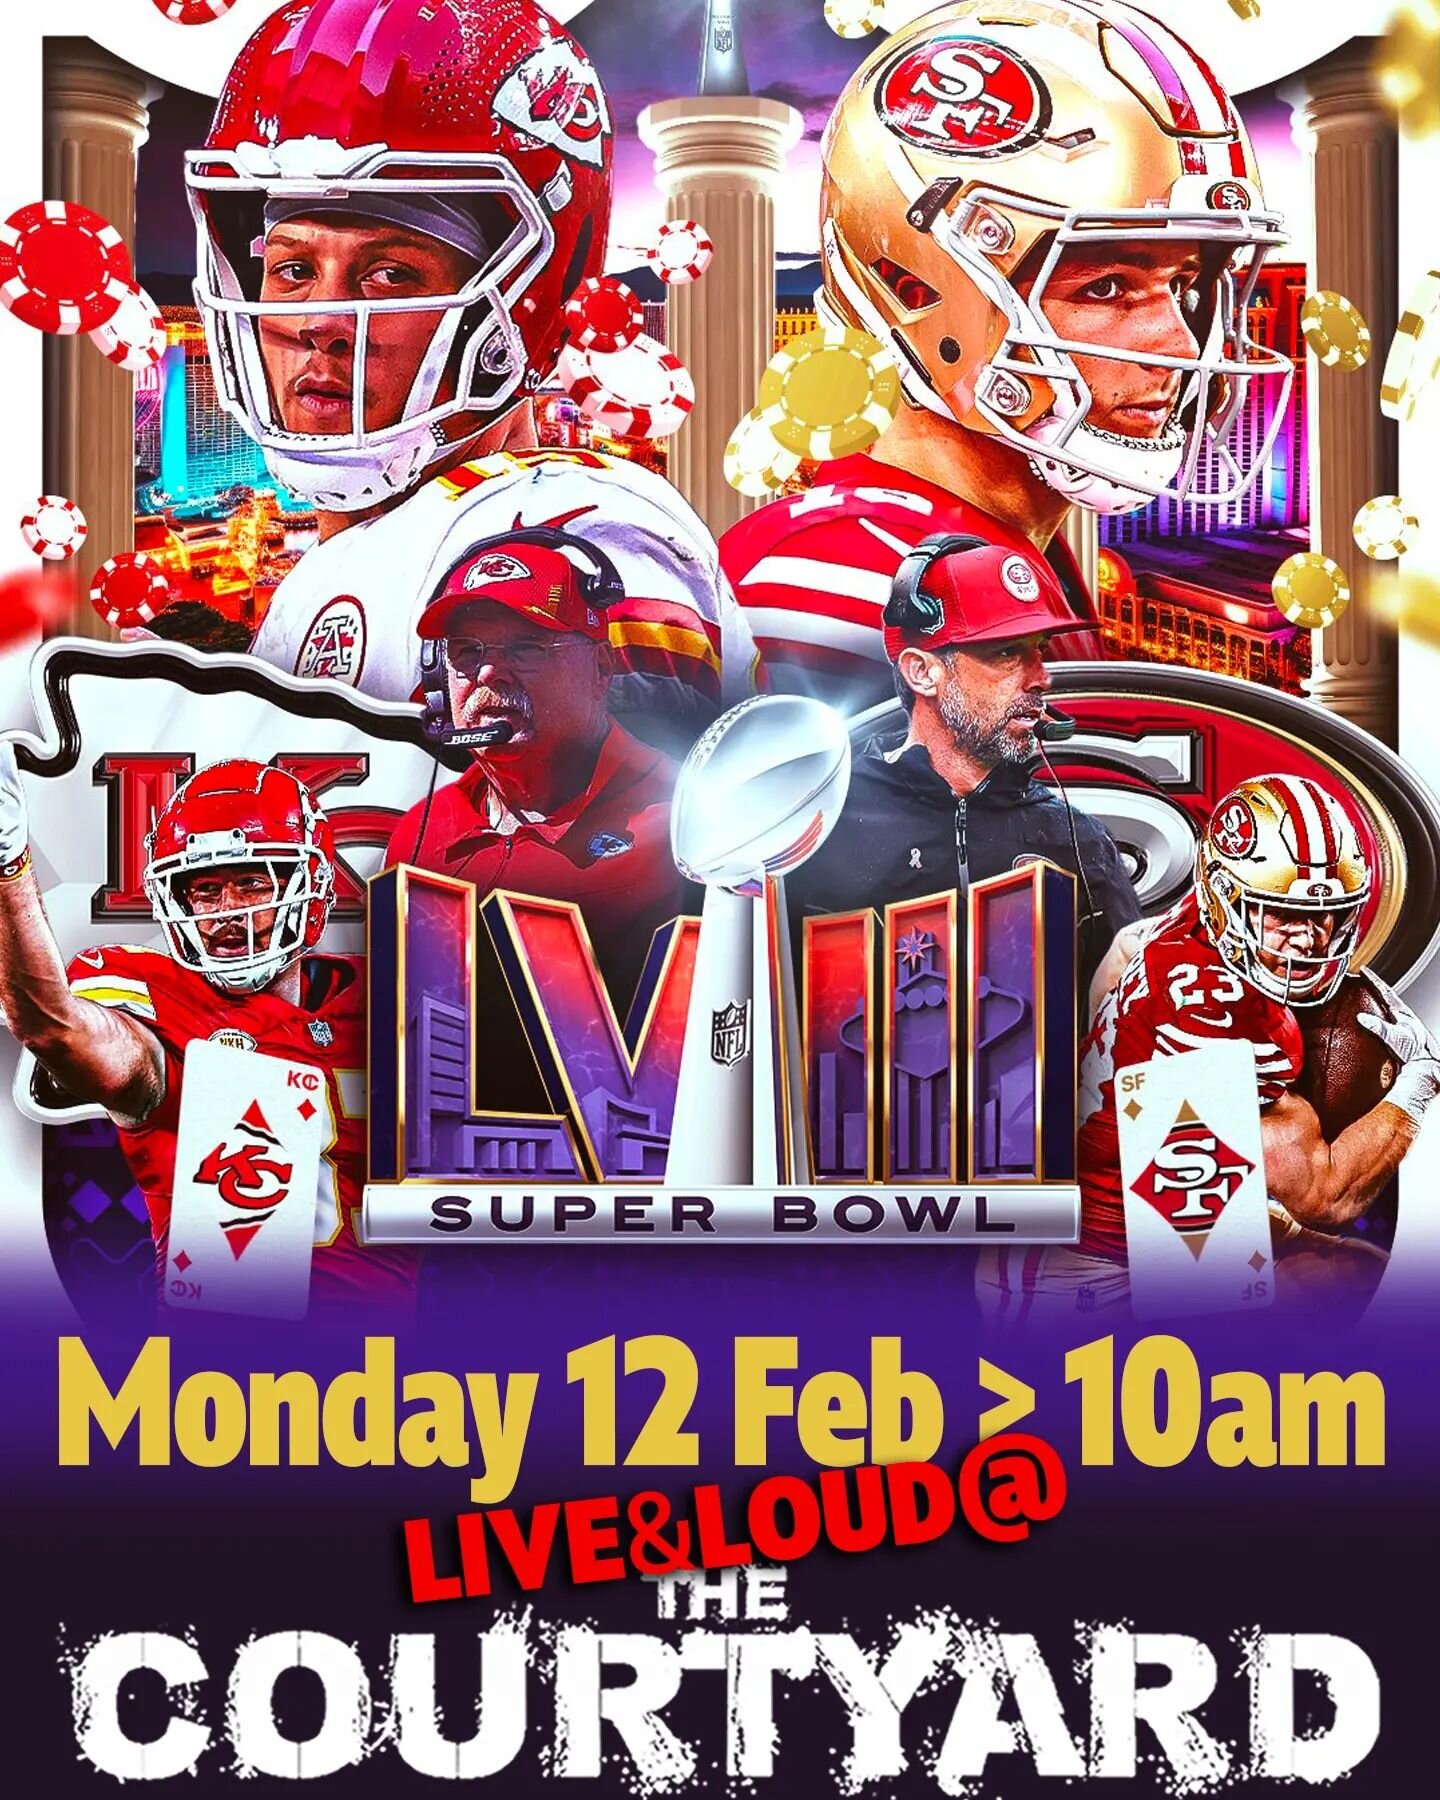 🏈🏈🏈 SUPERBOWL🏈🏈🏈
 
This Monday who have you got?

49ers vs Chiefs 

#cairns #cairnsesplanade #cairnslagoon #nfl #americanfootball #superbowl